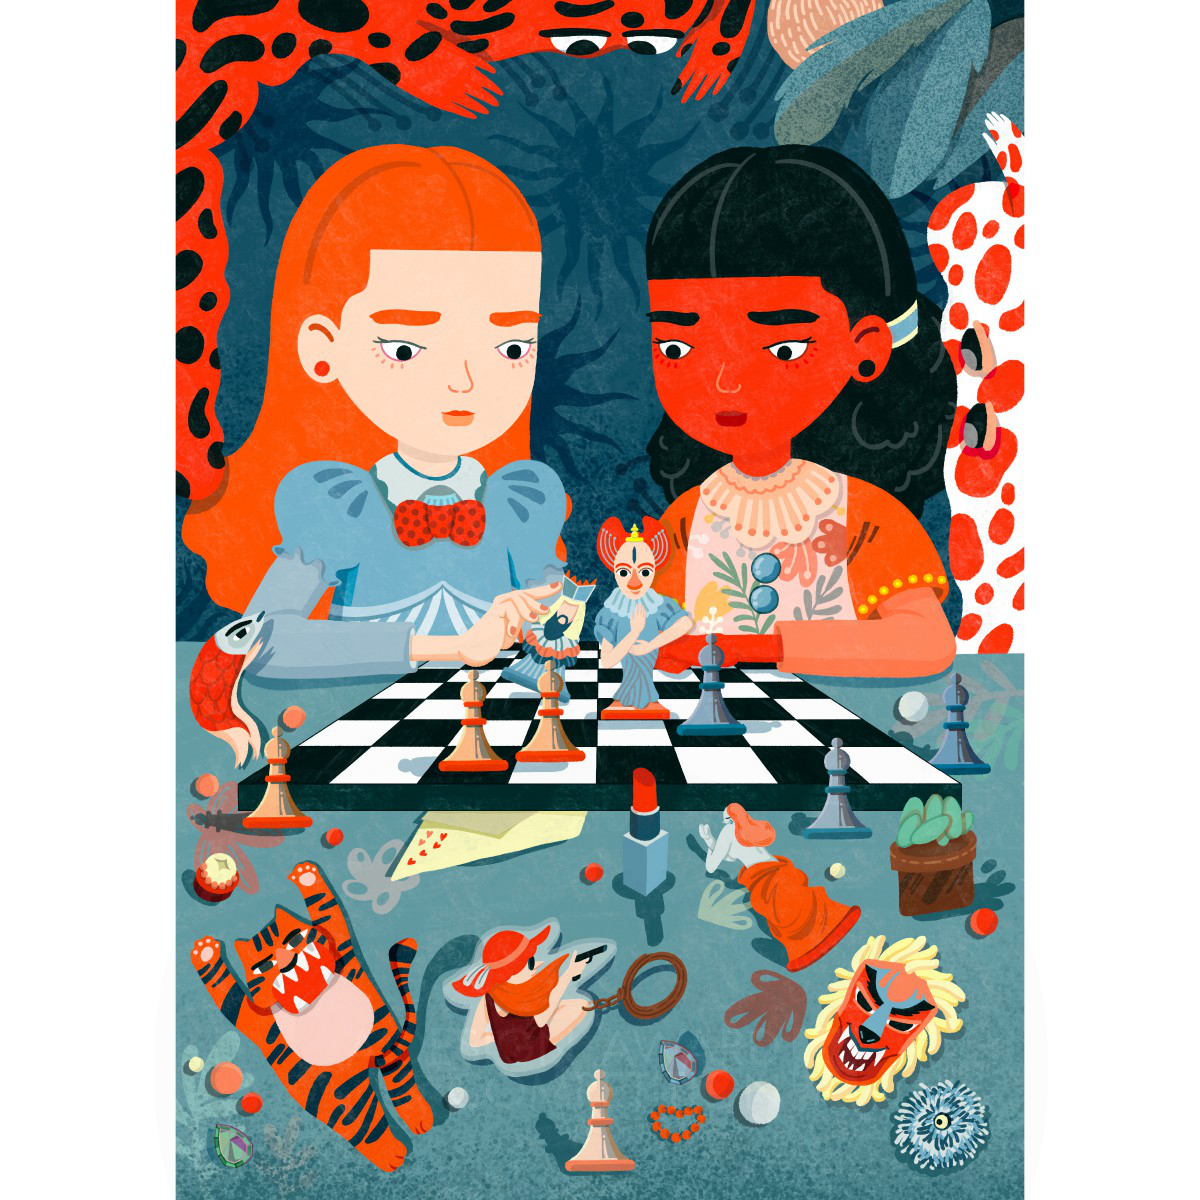 Mengyao GUO wins Iron at the prestigious A' Graphics, Illustration and Visual Communication Design Award with Girls with Chess Editorial Illustration.